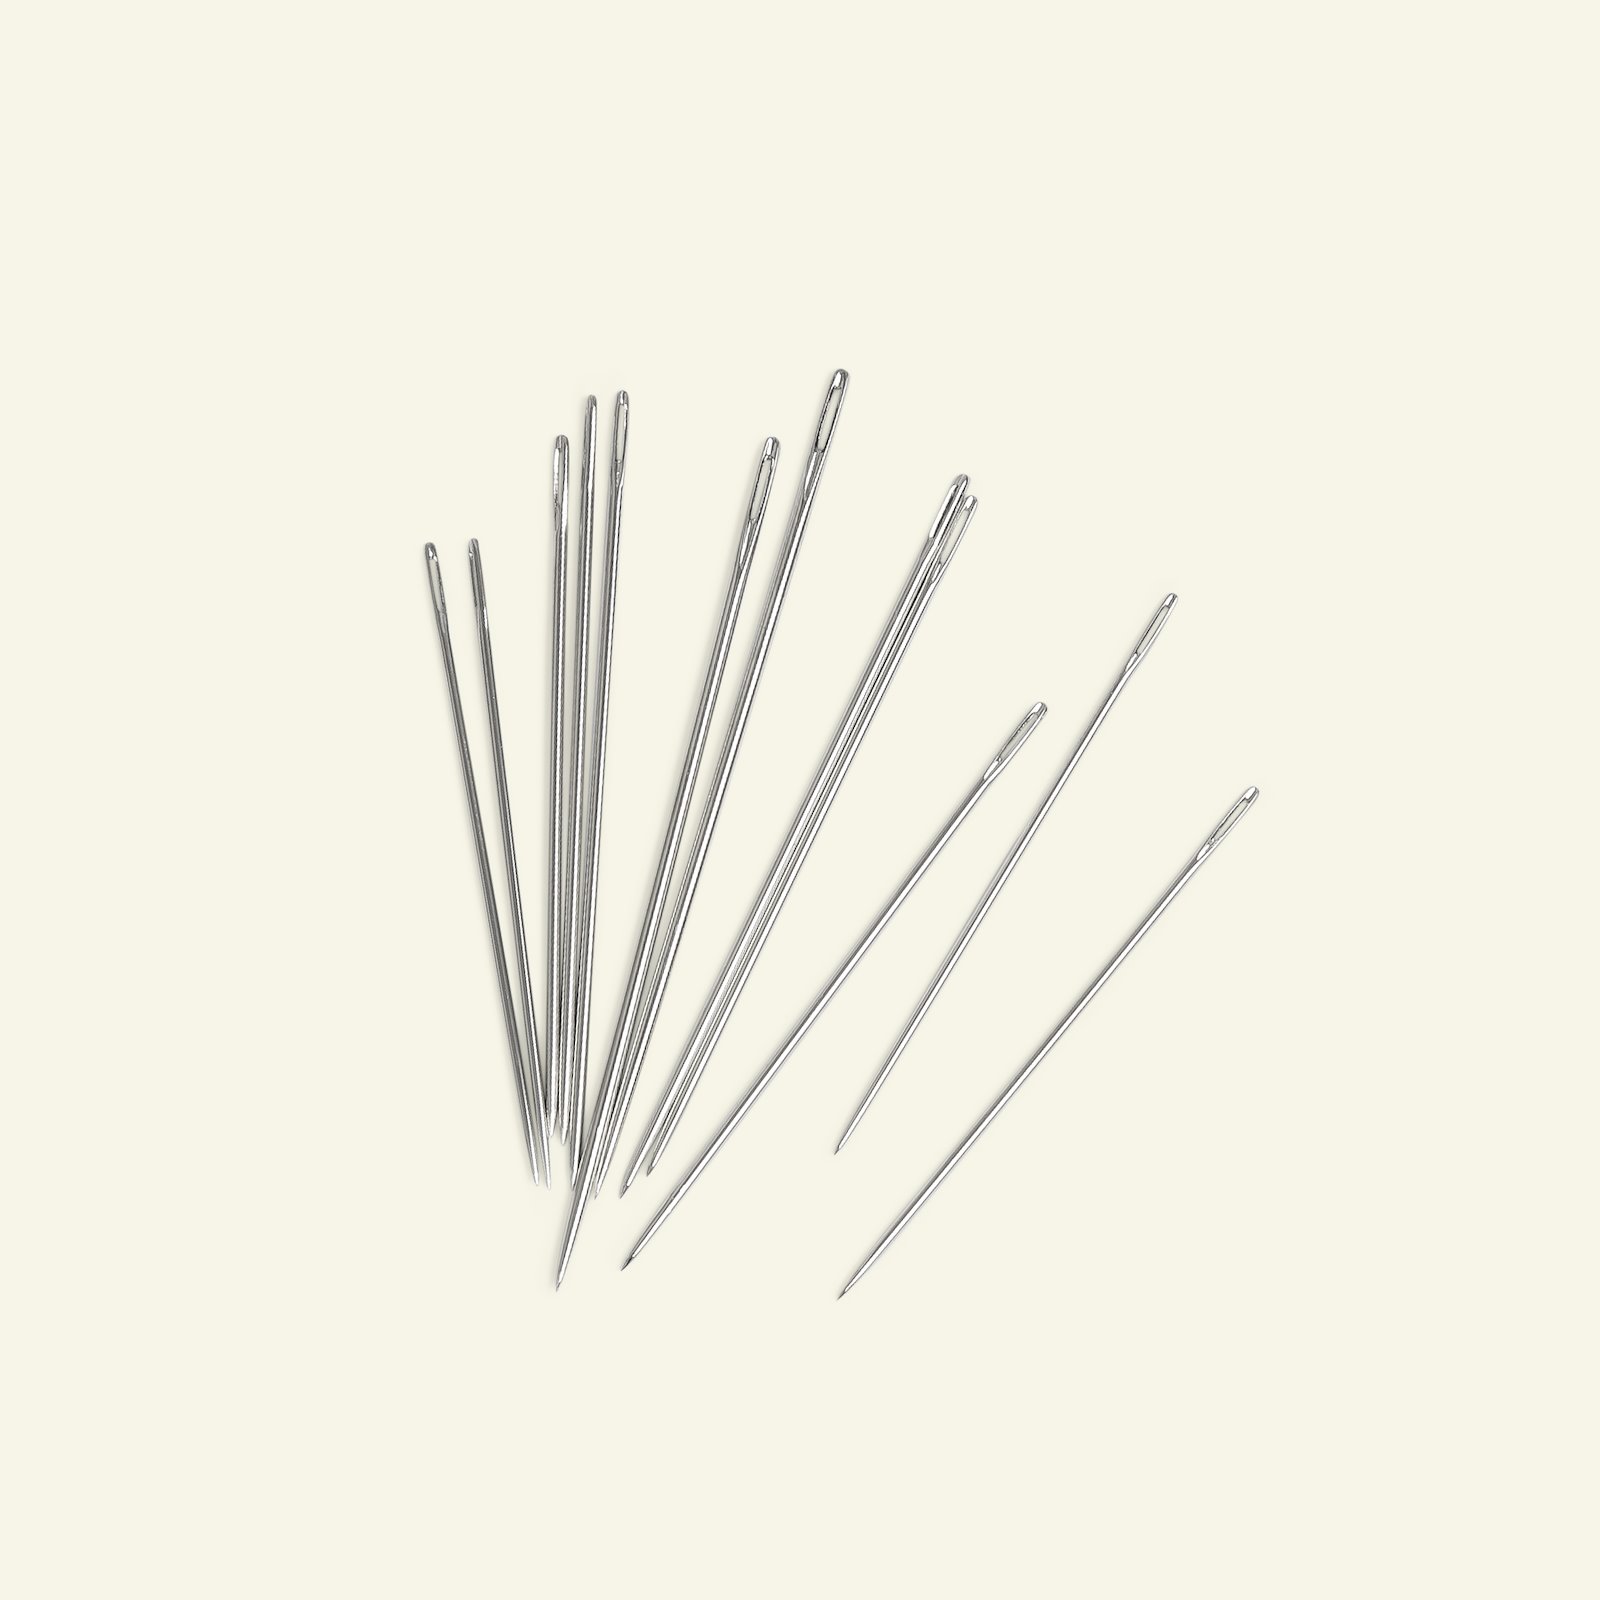 Embroidery needles size 1-5 12pcs 46524_pack